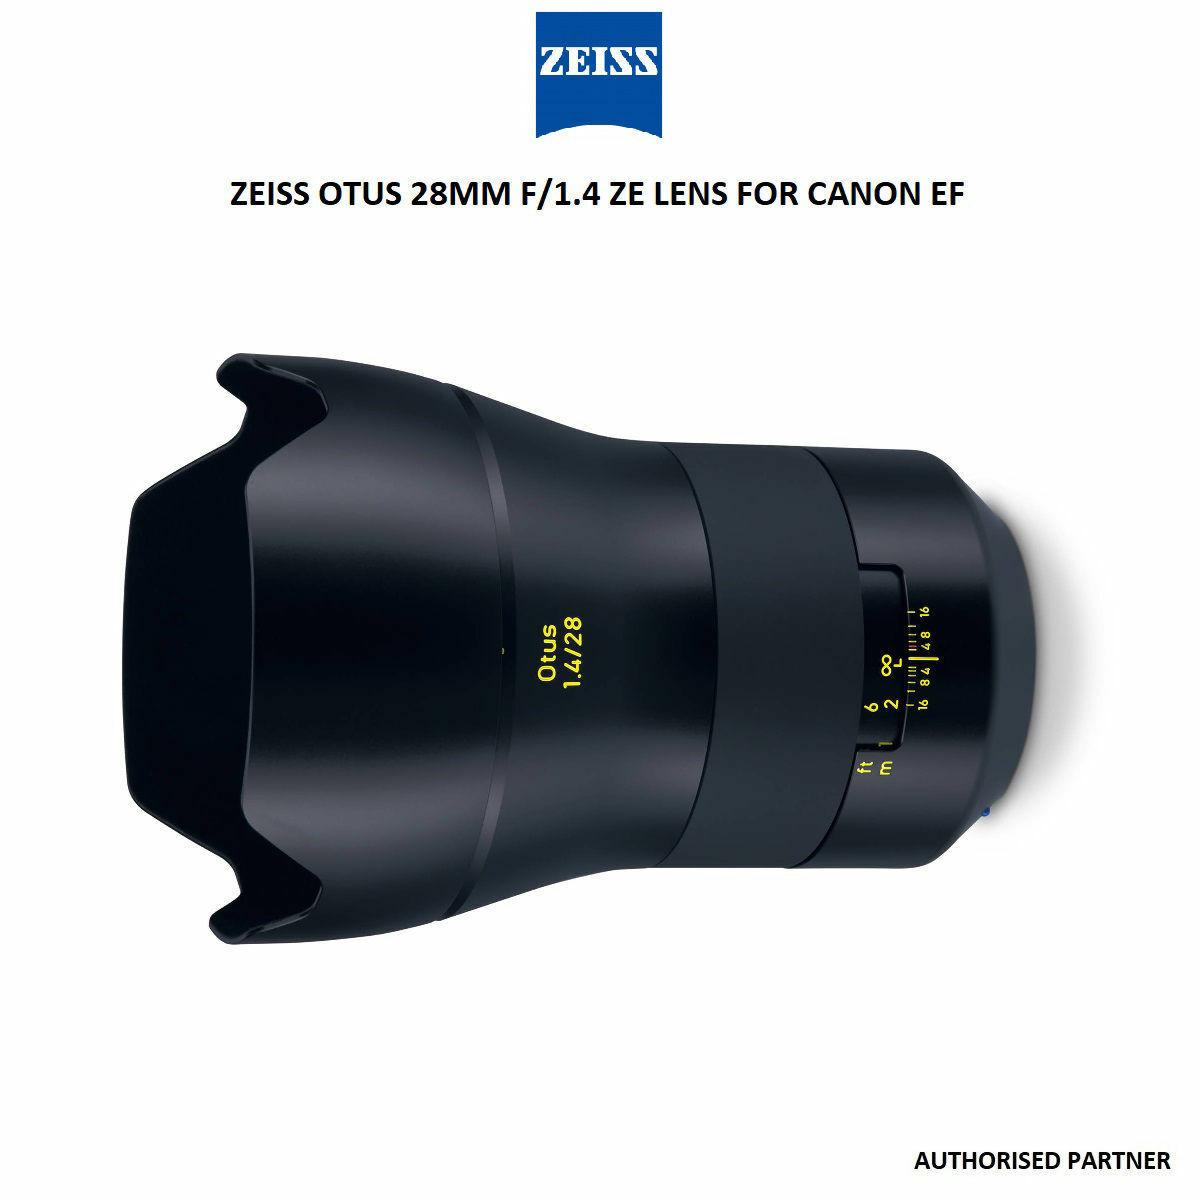 ZEISS OTUS 28MM F/1.4 ZE LENS FOR CANON EF » HpCamStore